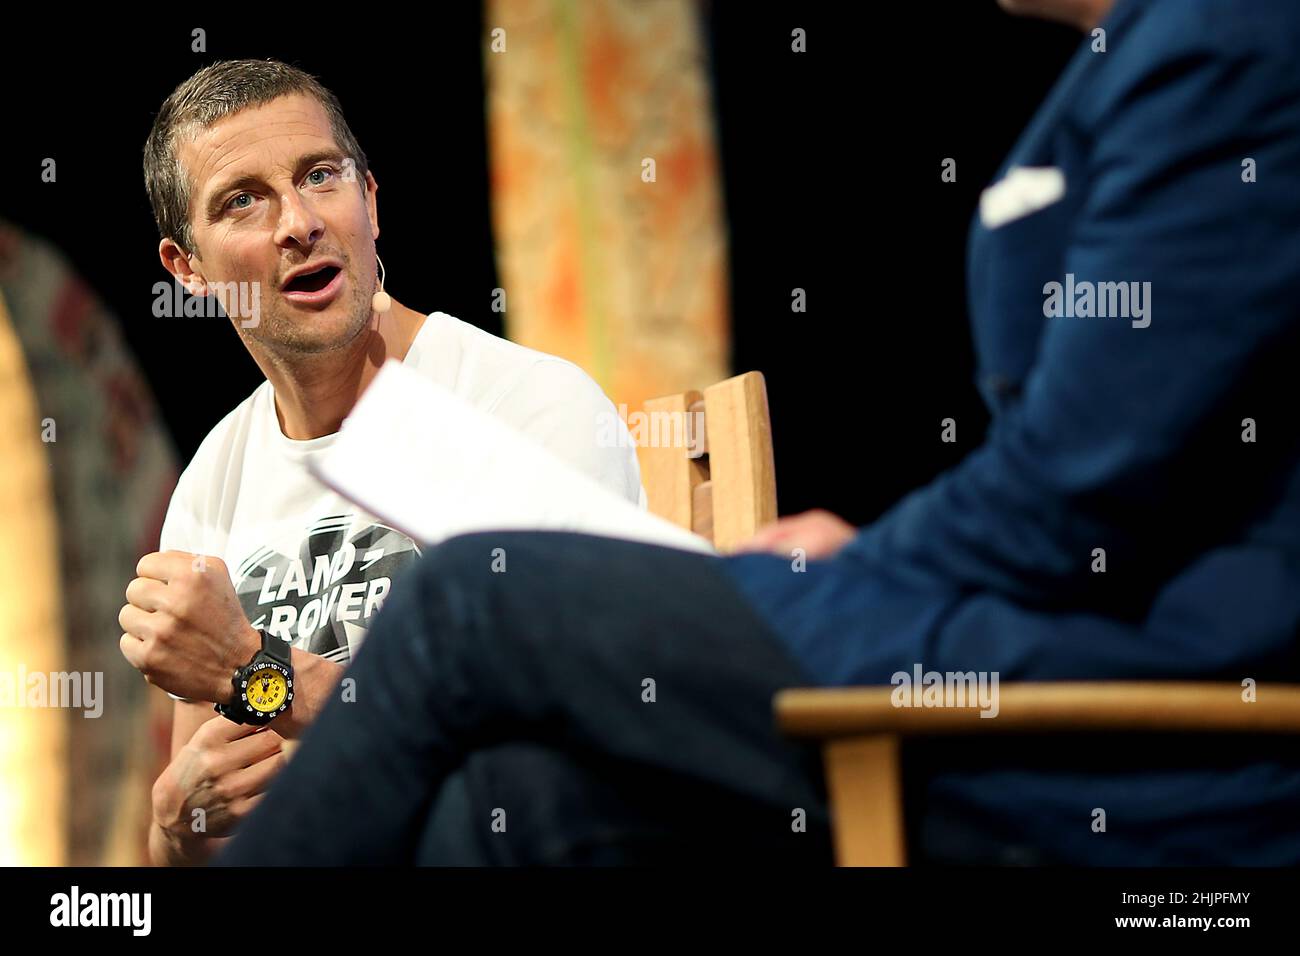 Bear Grylls at Hay-On-Wye in Wales on the 26th of May 2018, speaking at the Hay Festival.  Edward Michael 'Bear' Grylls OBE is a British adventurer, w Stock Photo